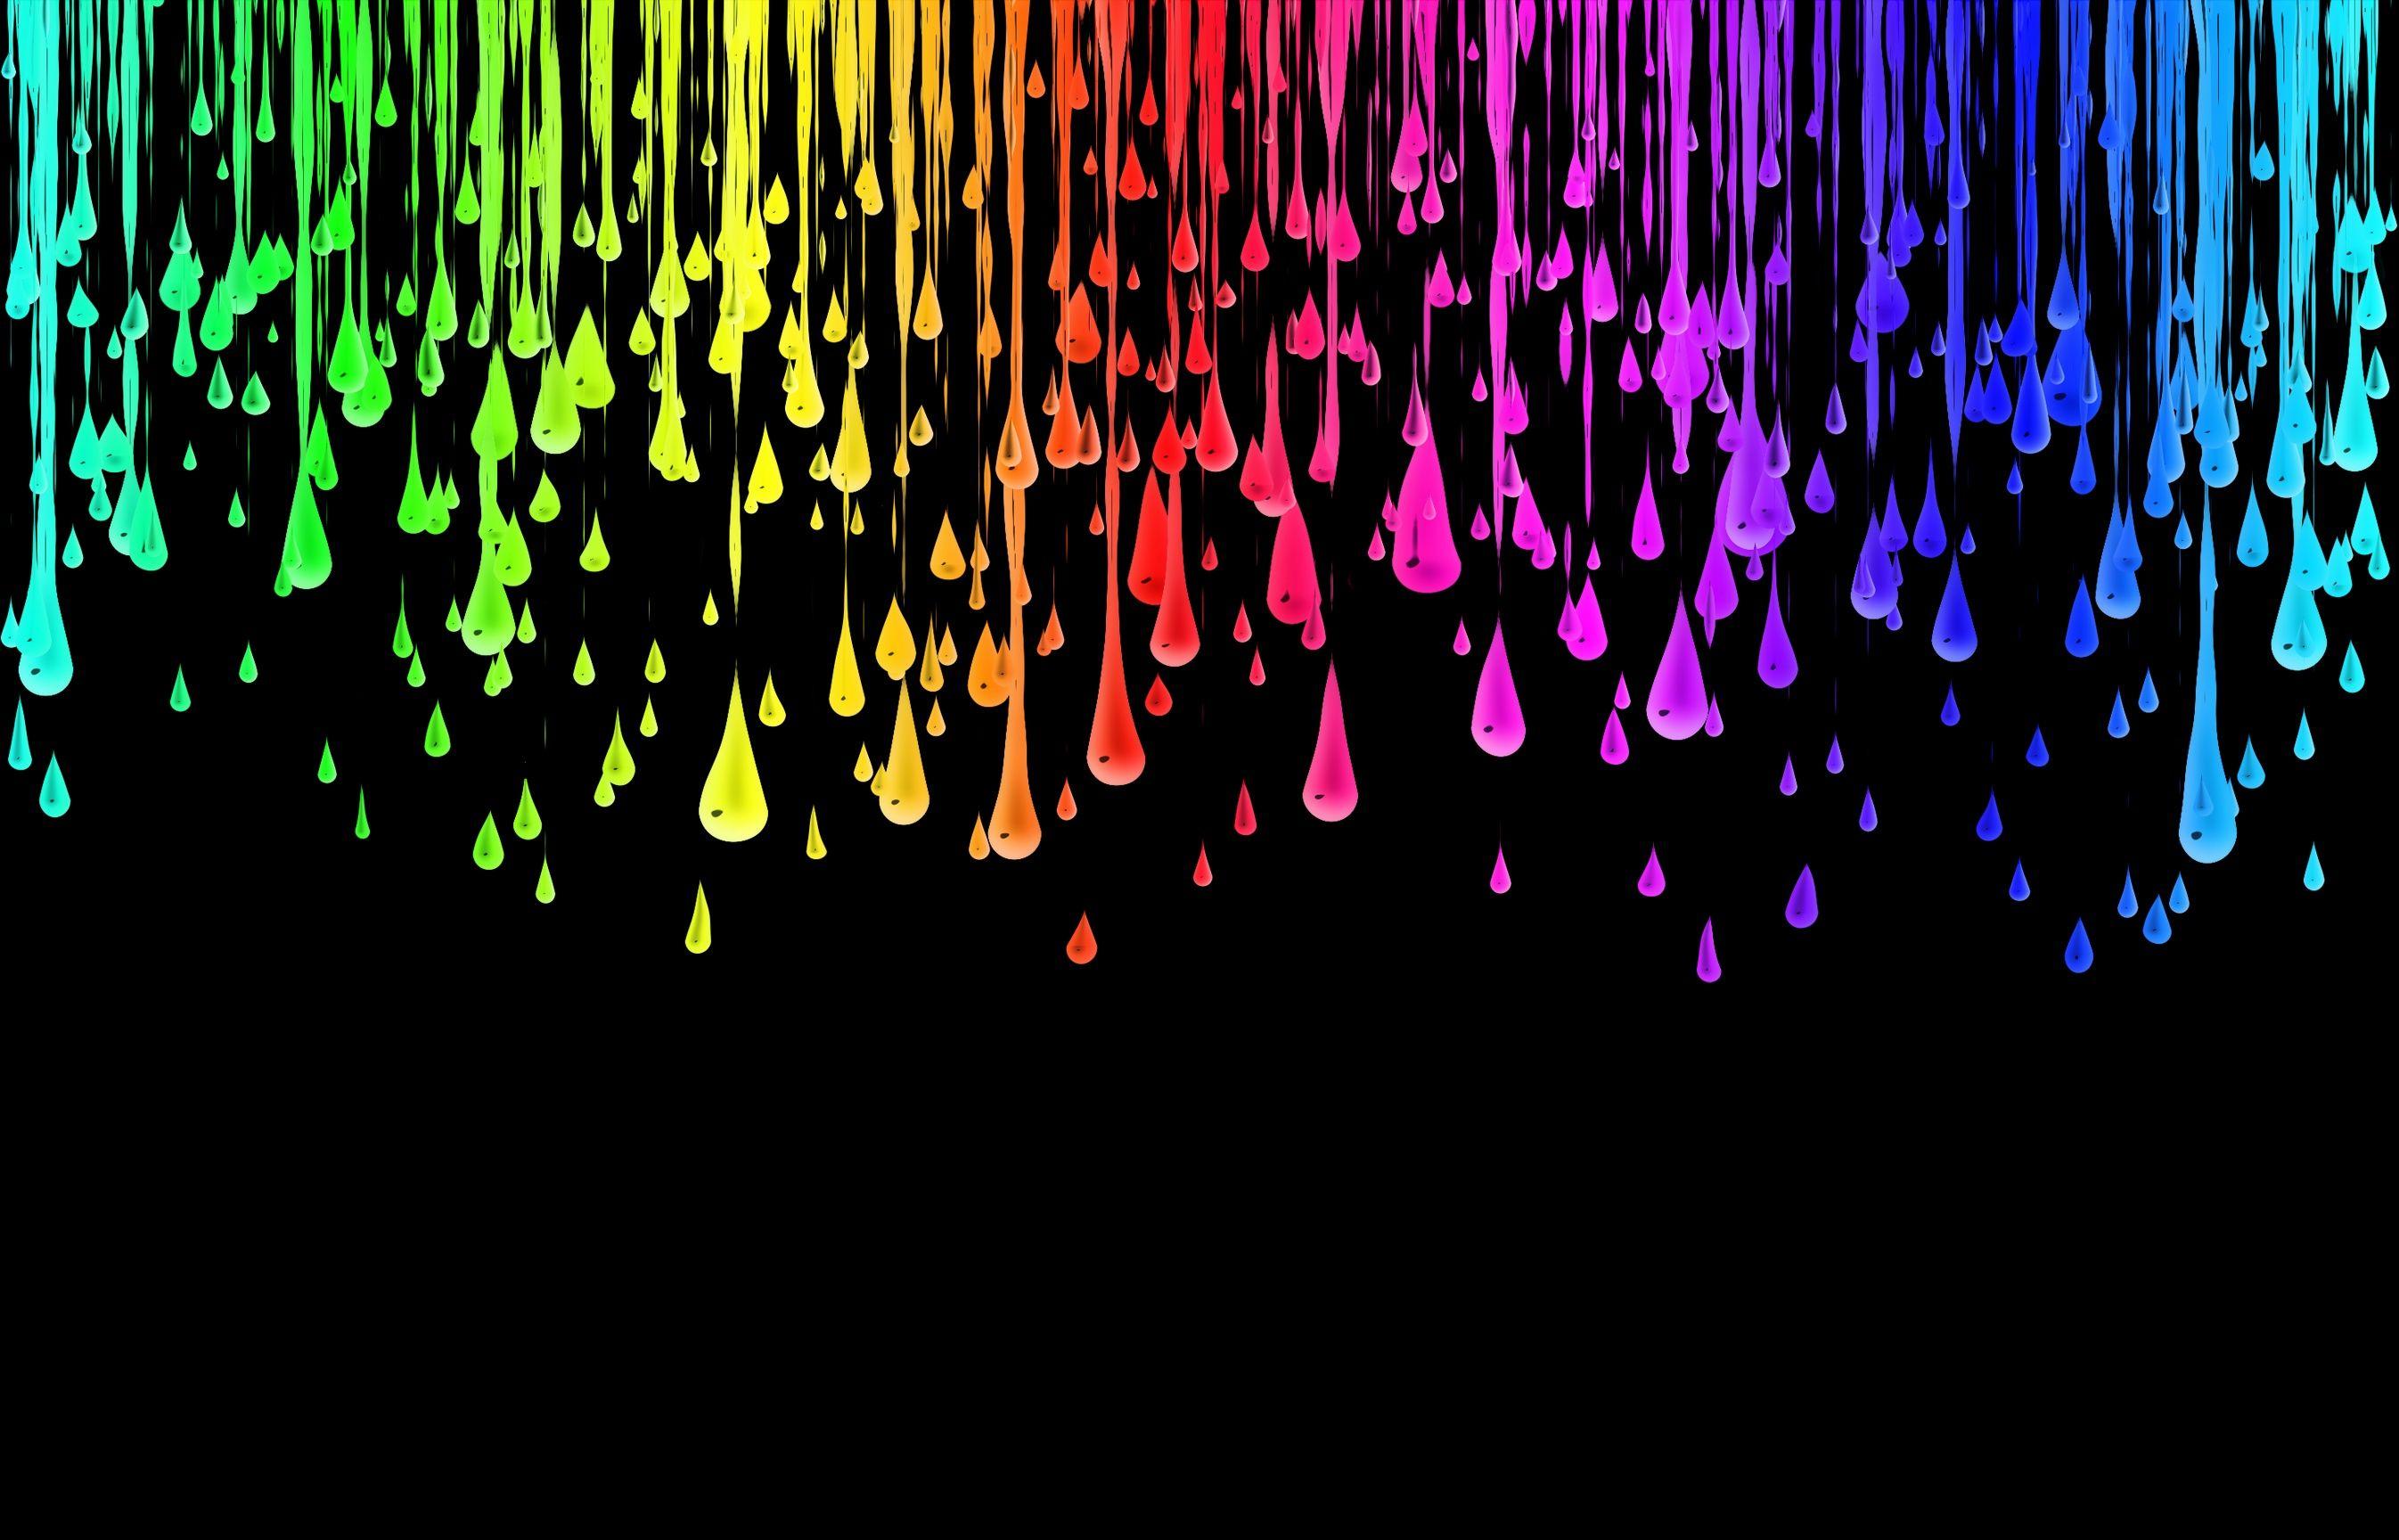 Smart Abstract Color Wallpaper 2692x1728PX HD Colours in Dark